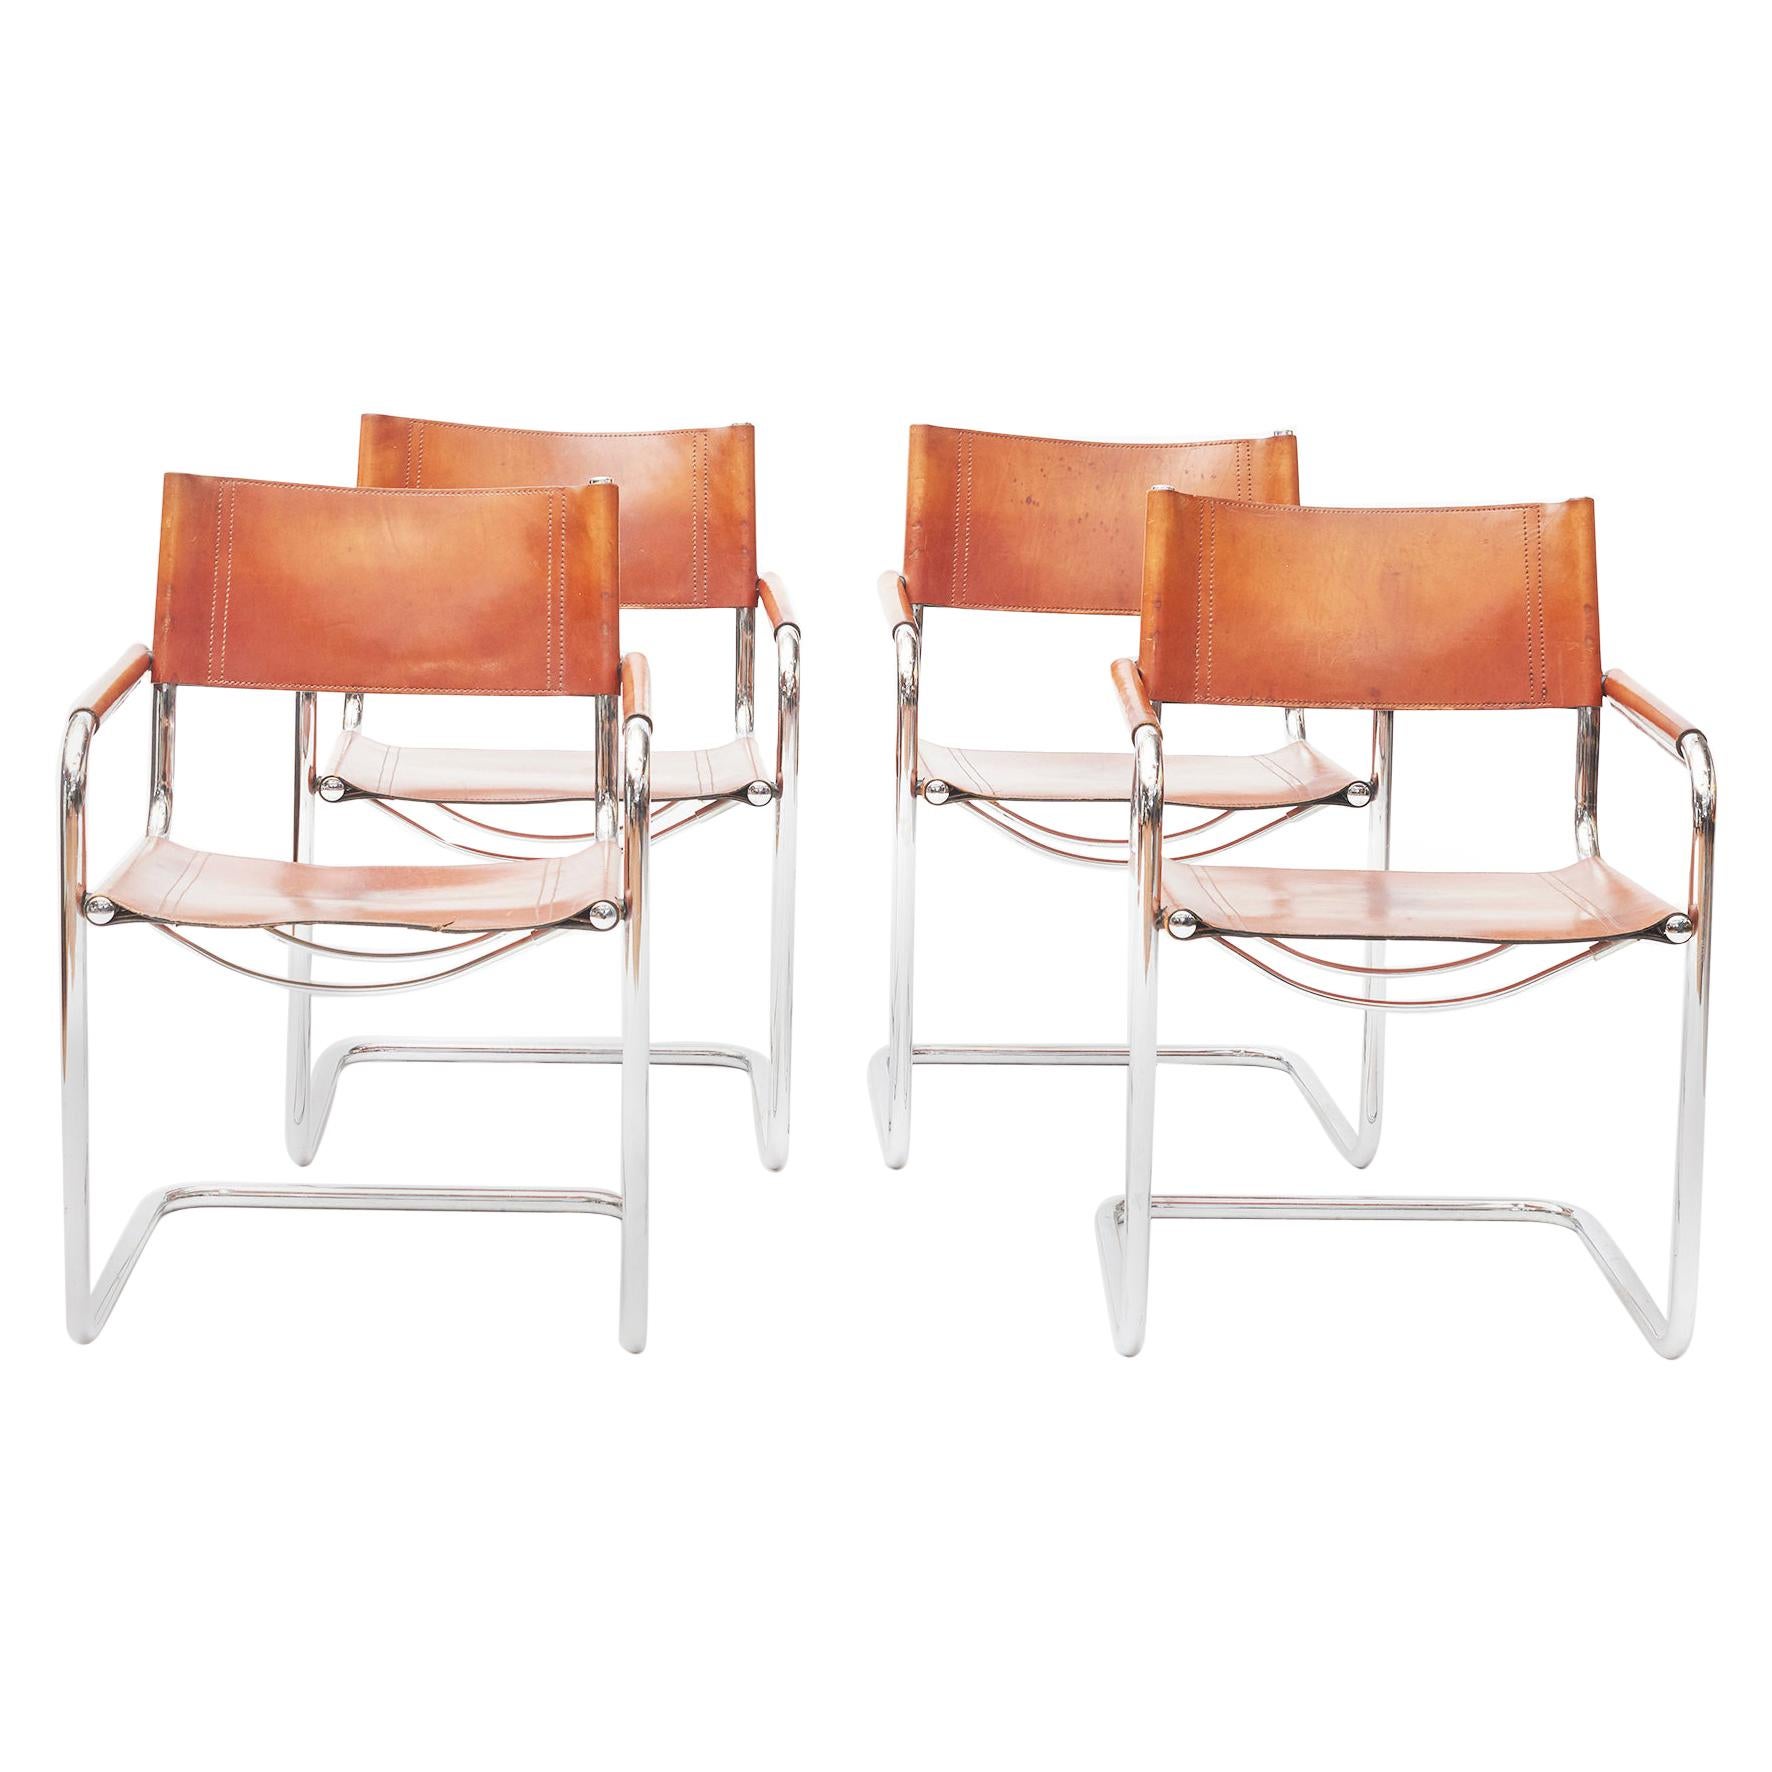 Set of Four MG5 Dining or Office Chairs Designed by Mart Stam